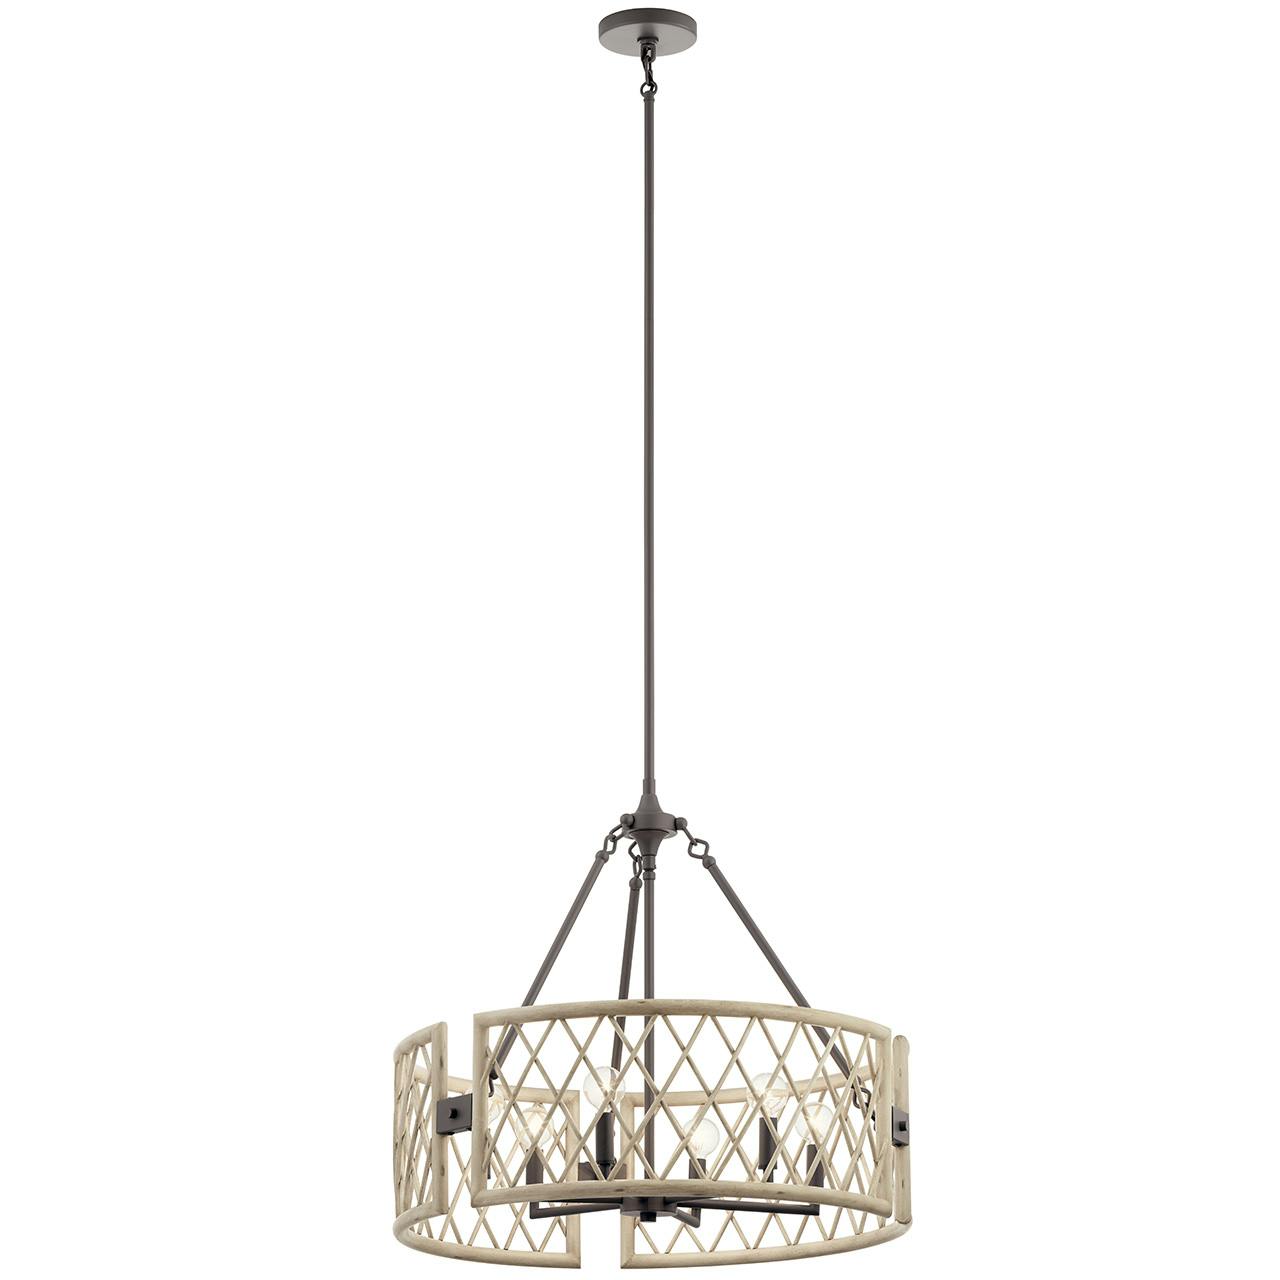 Oana 6 Light Chandelier White Washed Wood on a white background